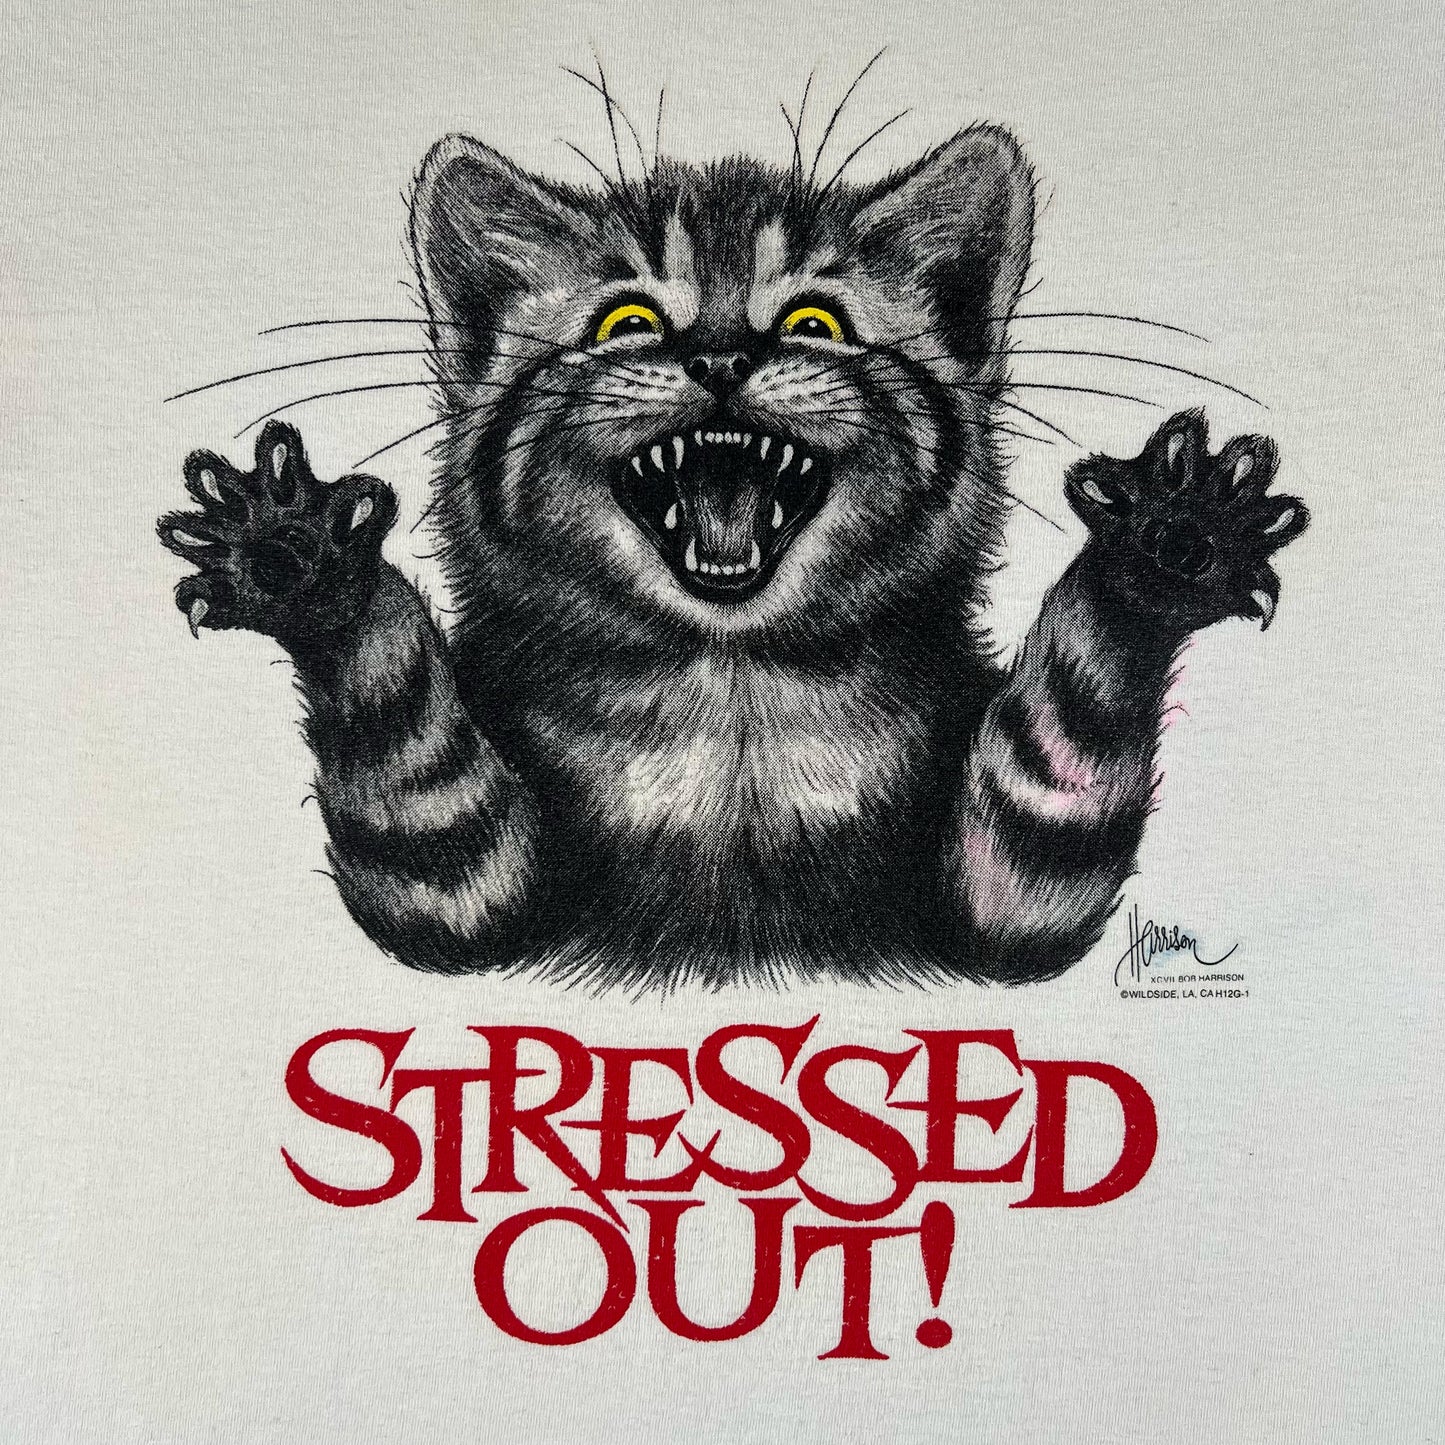 00s 'Stressed Out!' Cat Tee- M